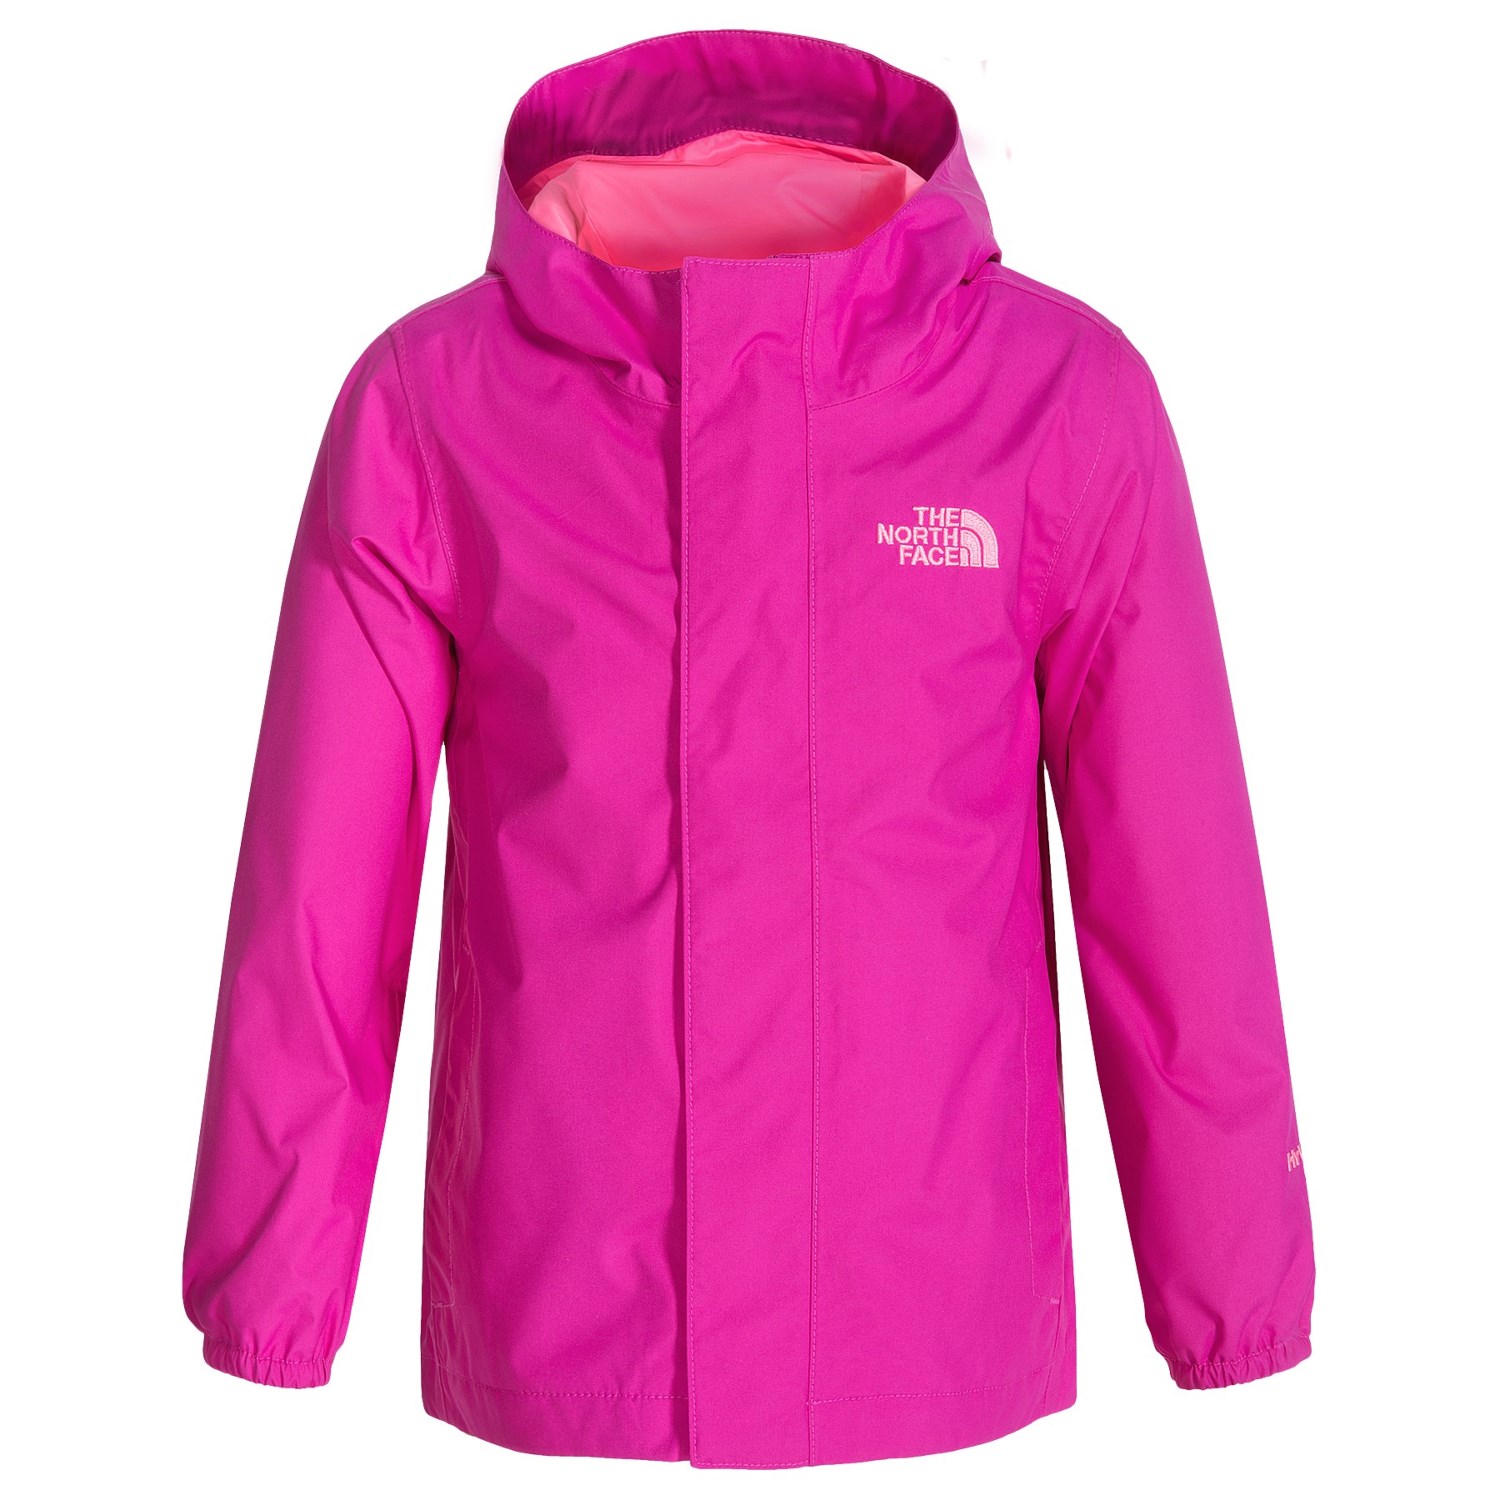 THE NORTH FACE TAILOUT 뽺̽  ǳ  Ʈ HYVENT 3T-